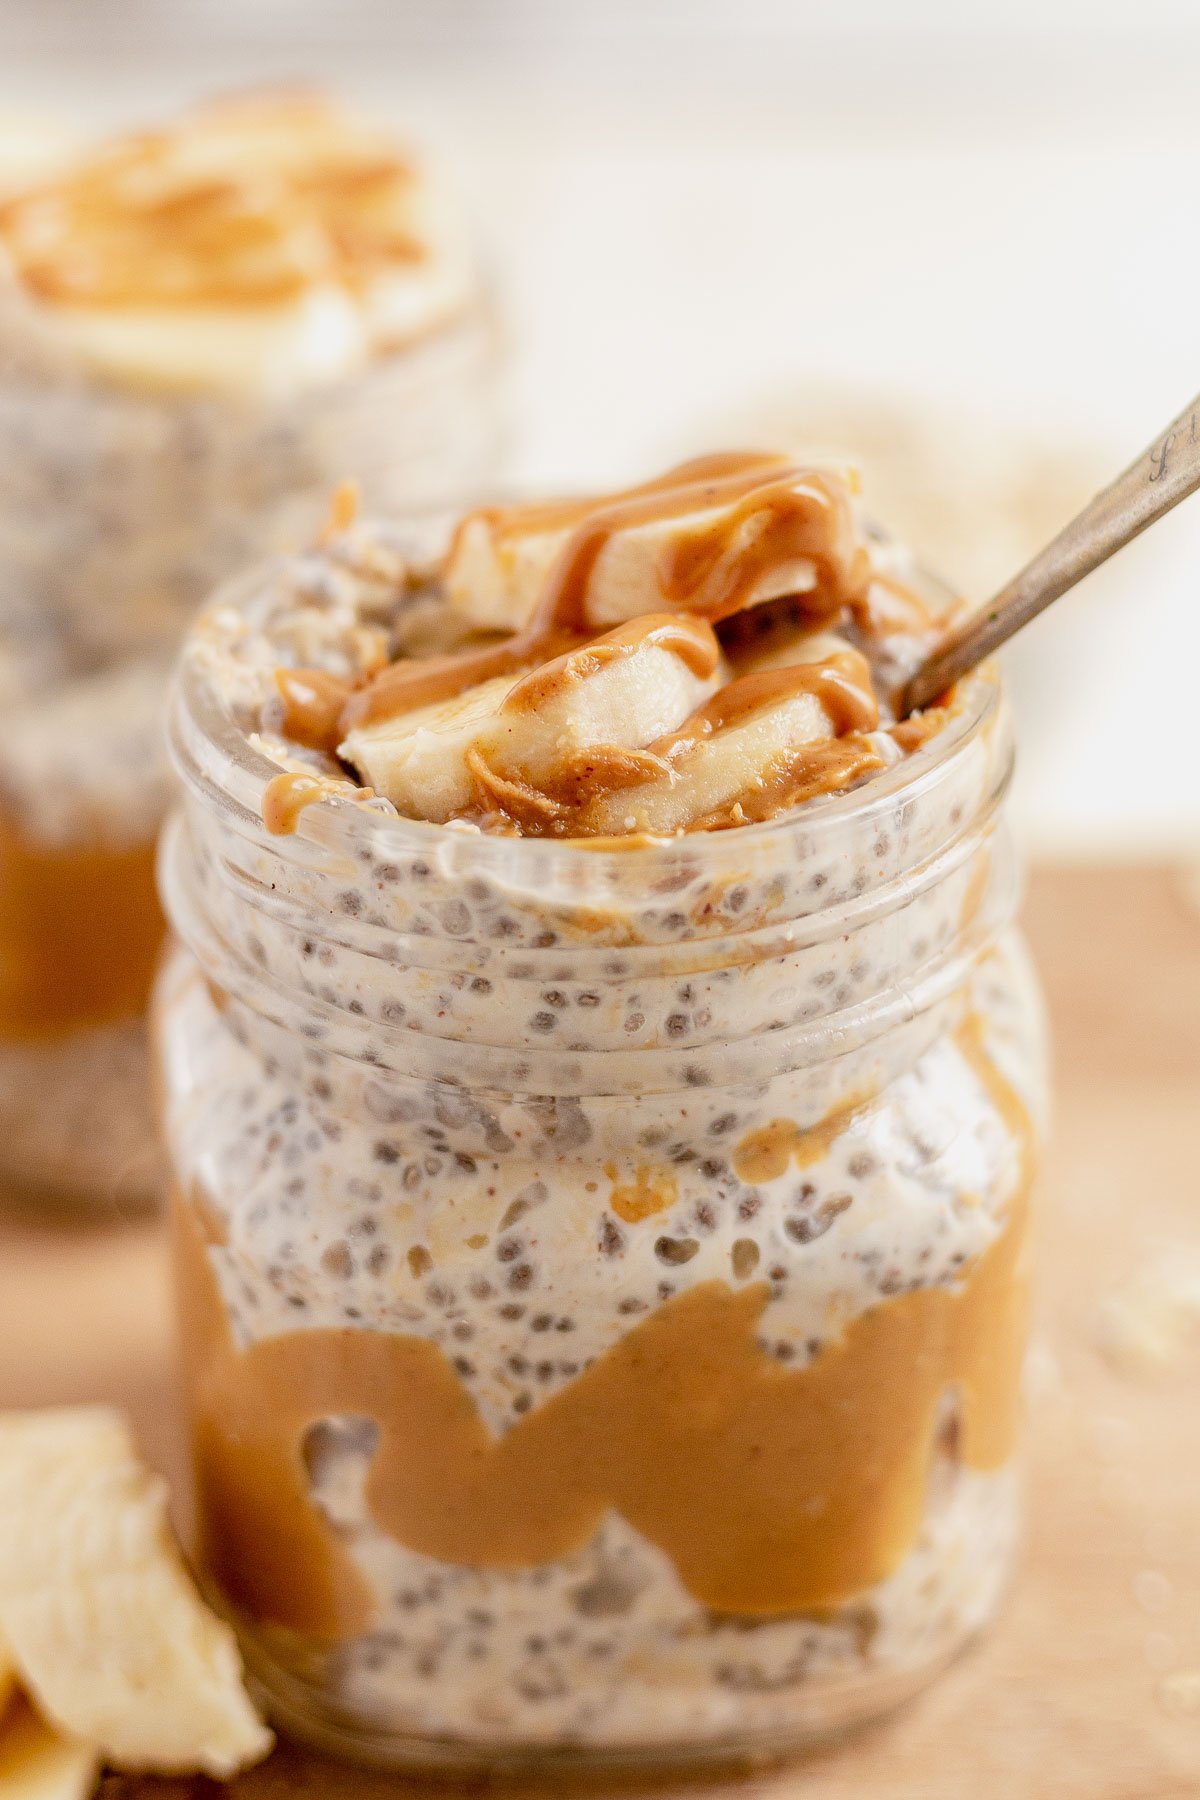 spoon scooping out peanut butter overnight oats from a glass jar